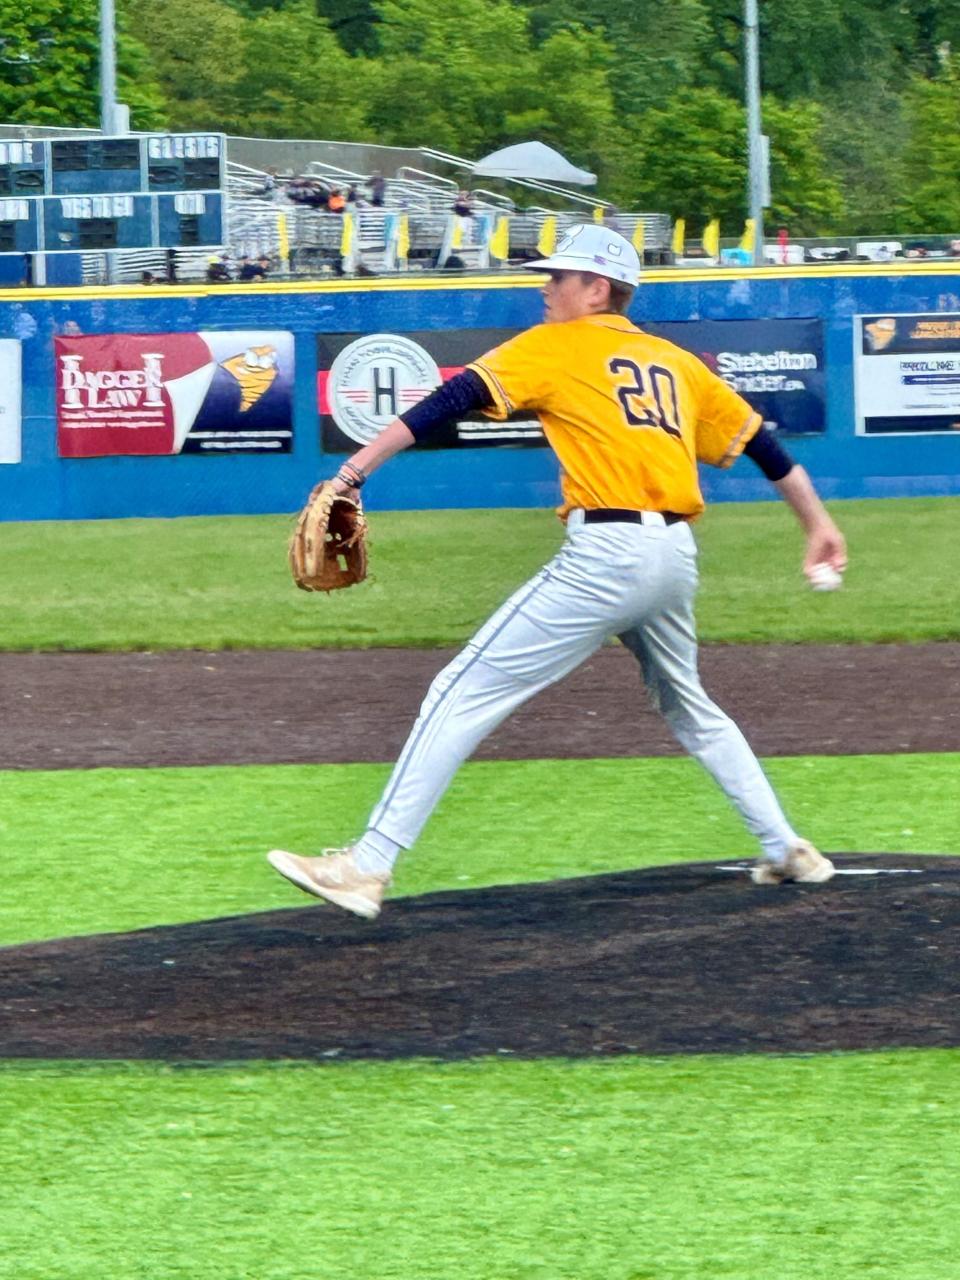 Lancaster sophomore pitcher Coleson Ross gets set to deliver a pitch against Bloom-Carroll on Saturday at England Field. He pitched four-plus innings to pick up the win the Gales' 6-2 victory.